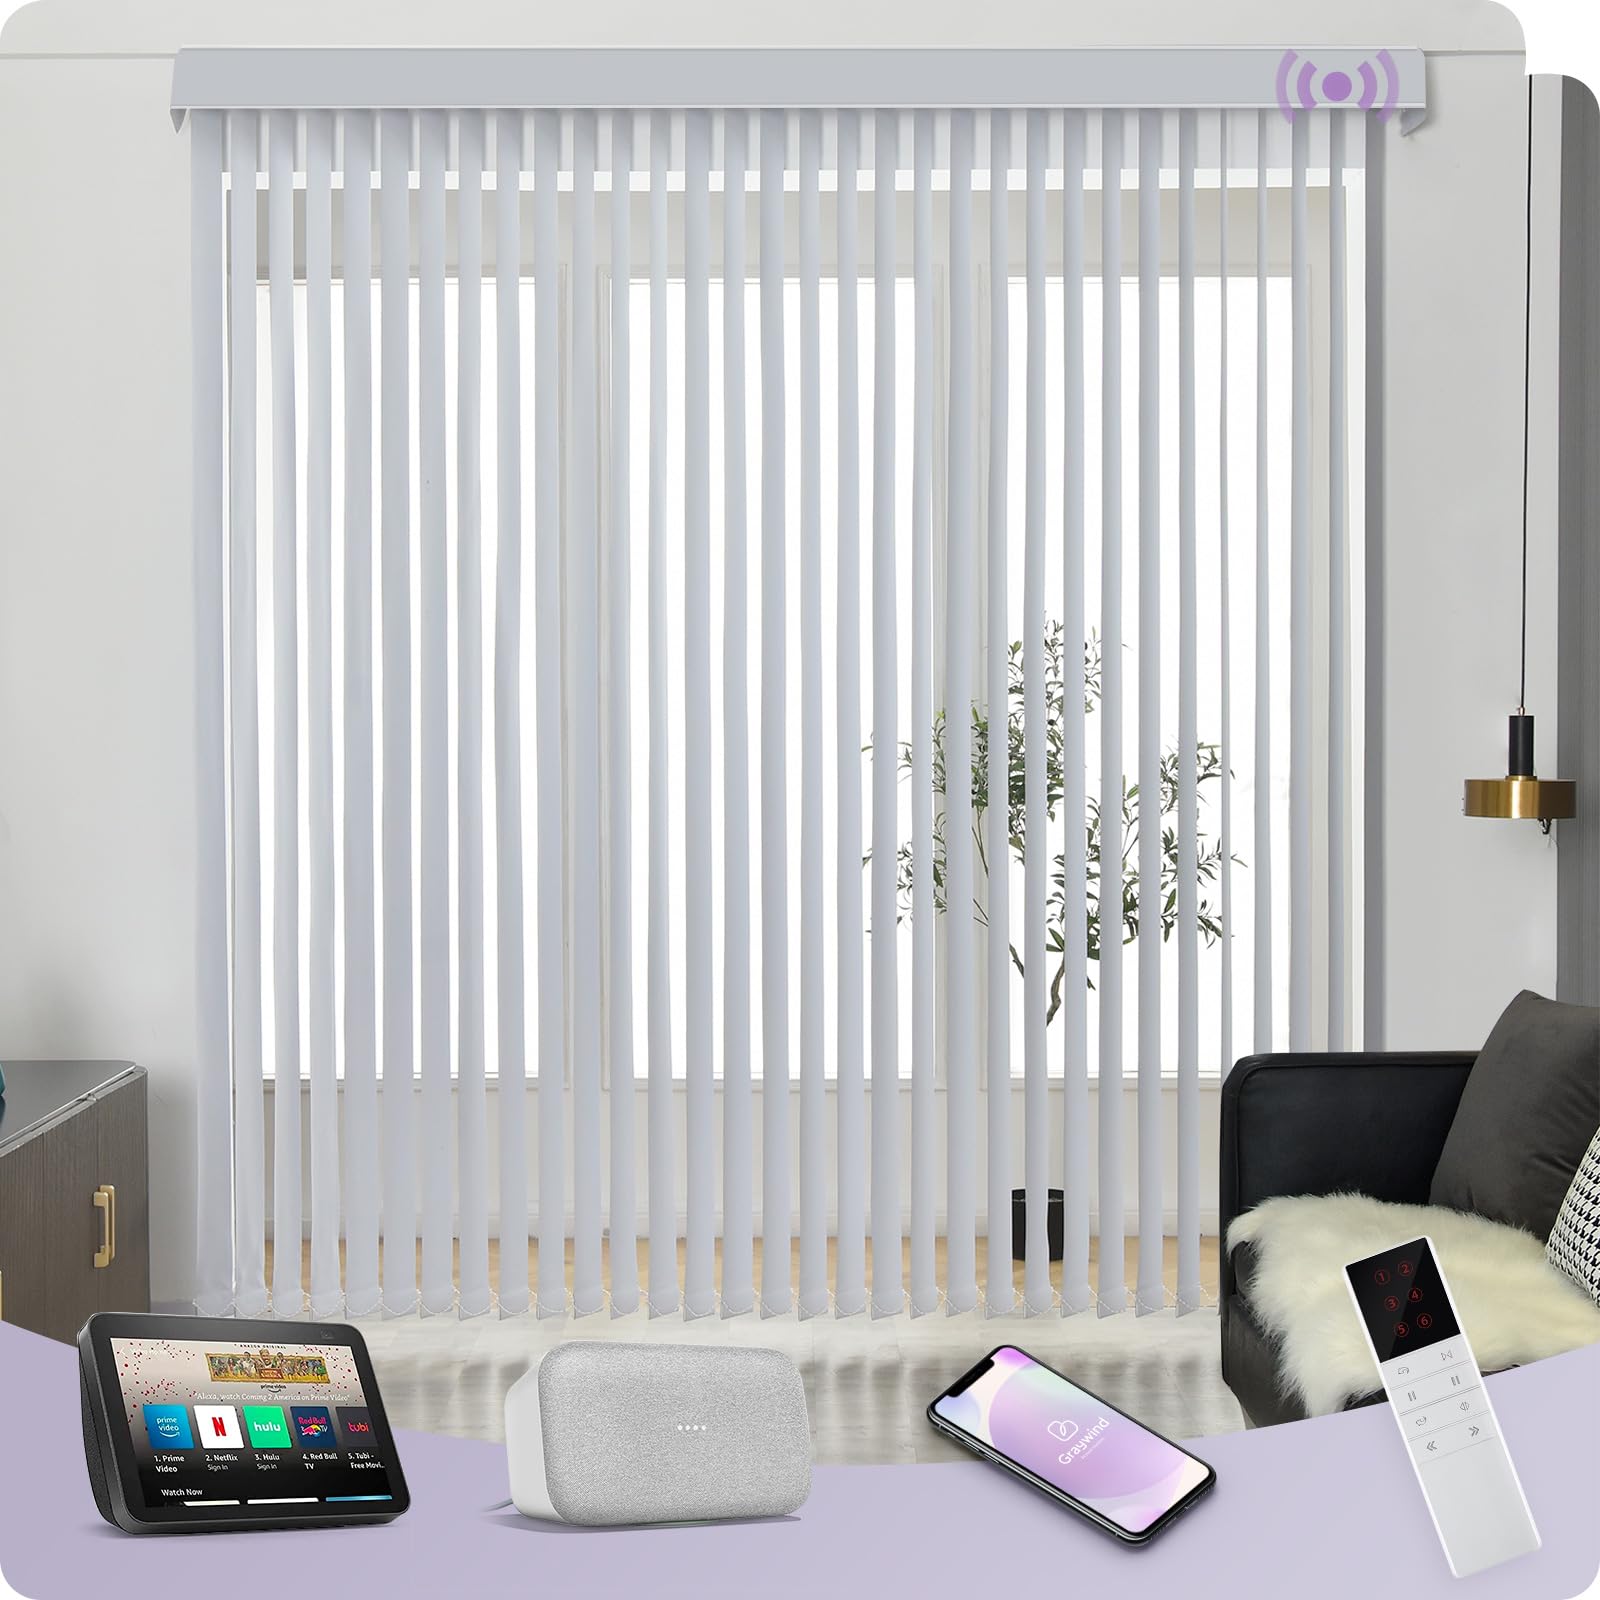 What Is The Standard Size For Vertical Blinds For Sliding Glass Doors